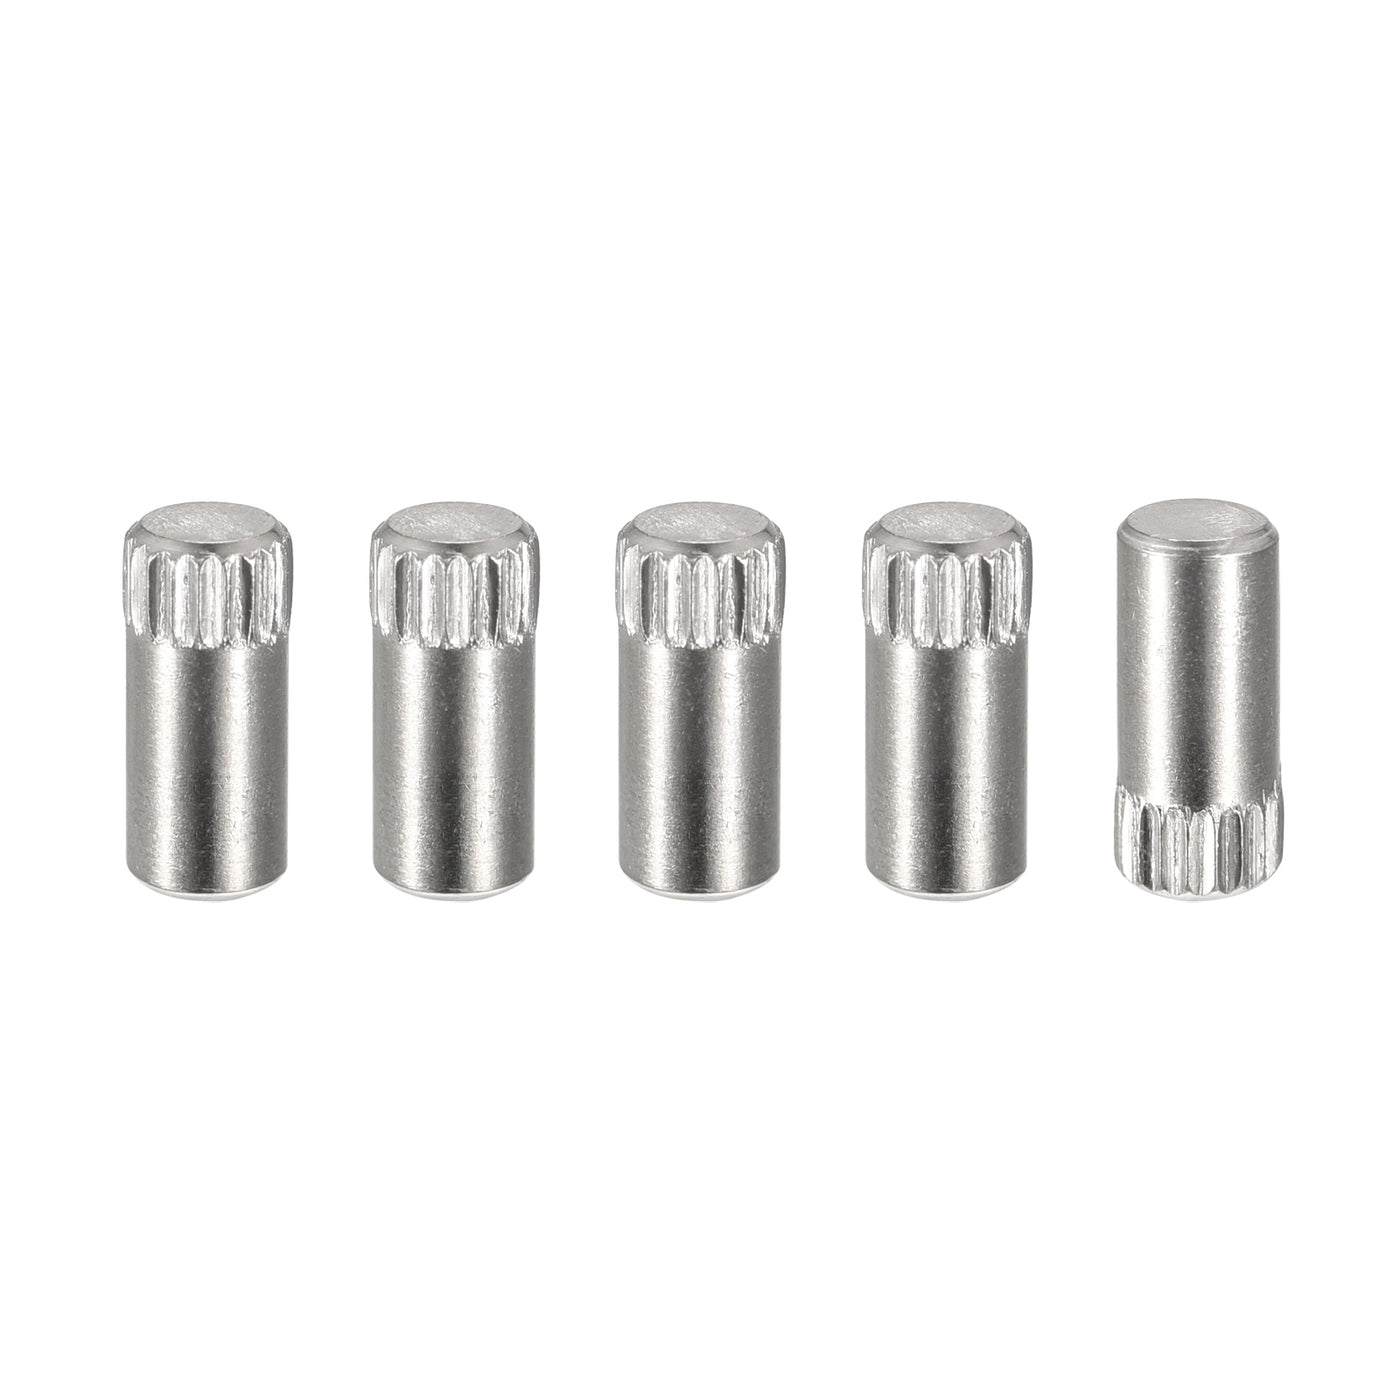 uxcell Uxcell 5x10mm 304 Stainless Steel Dowel Pins, 5Pcs Knurled Head Flat End Dowel Pin